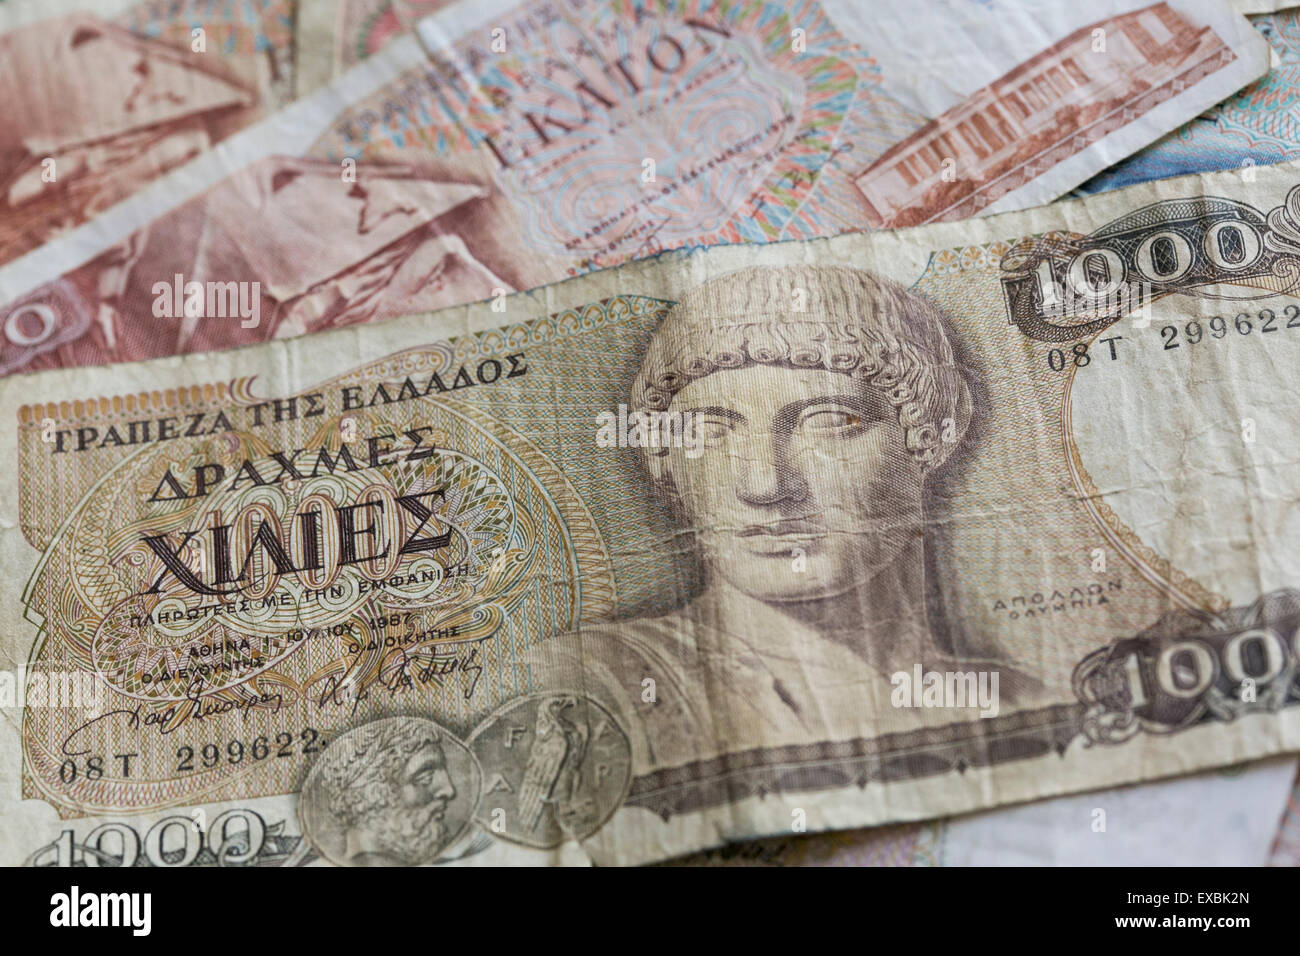 An arranged photo showing obsolete Greek Drachma currency notes in from the pre-Euro currency era. Stock Photo